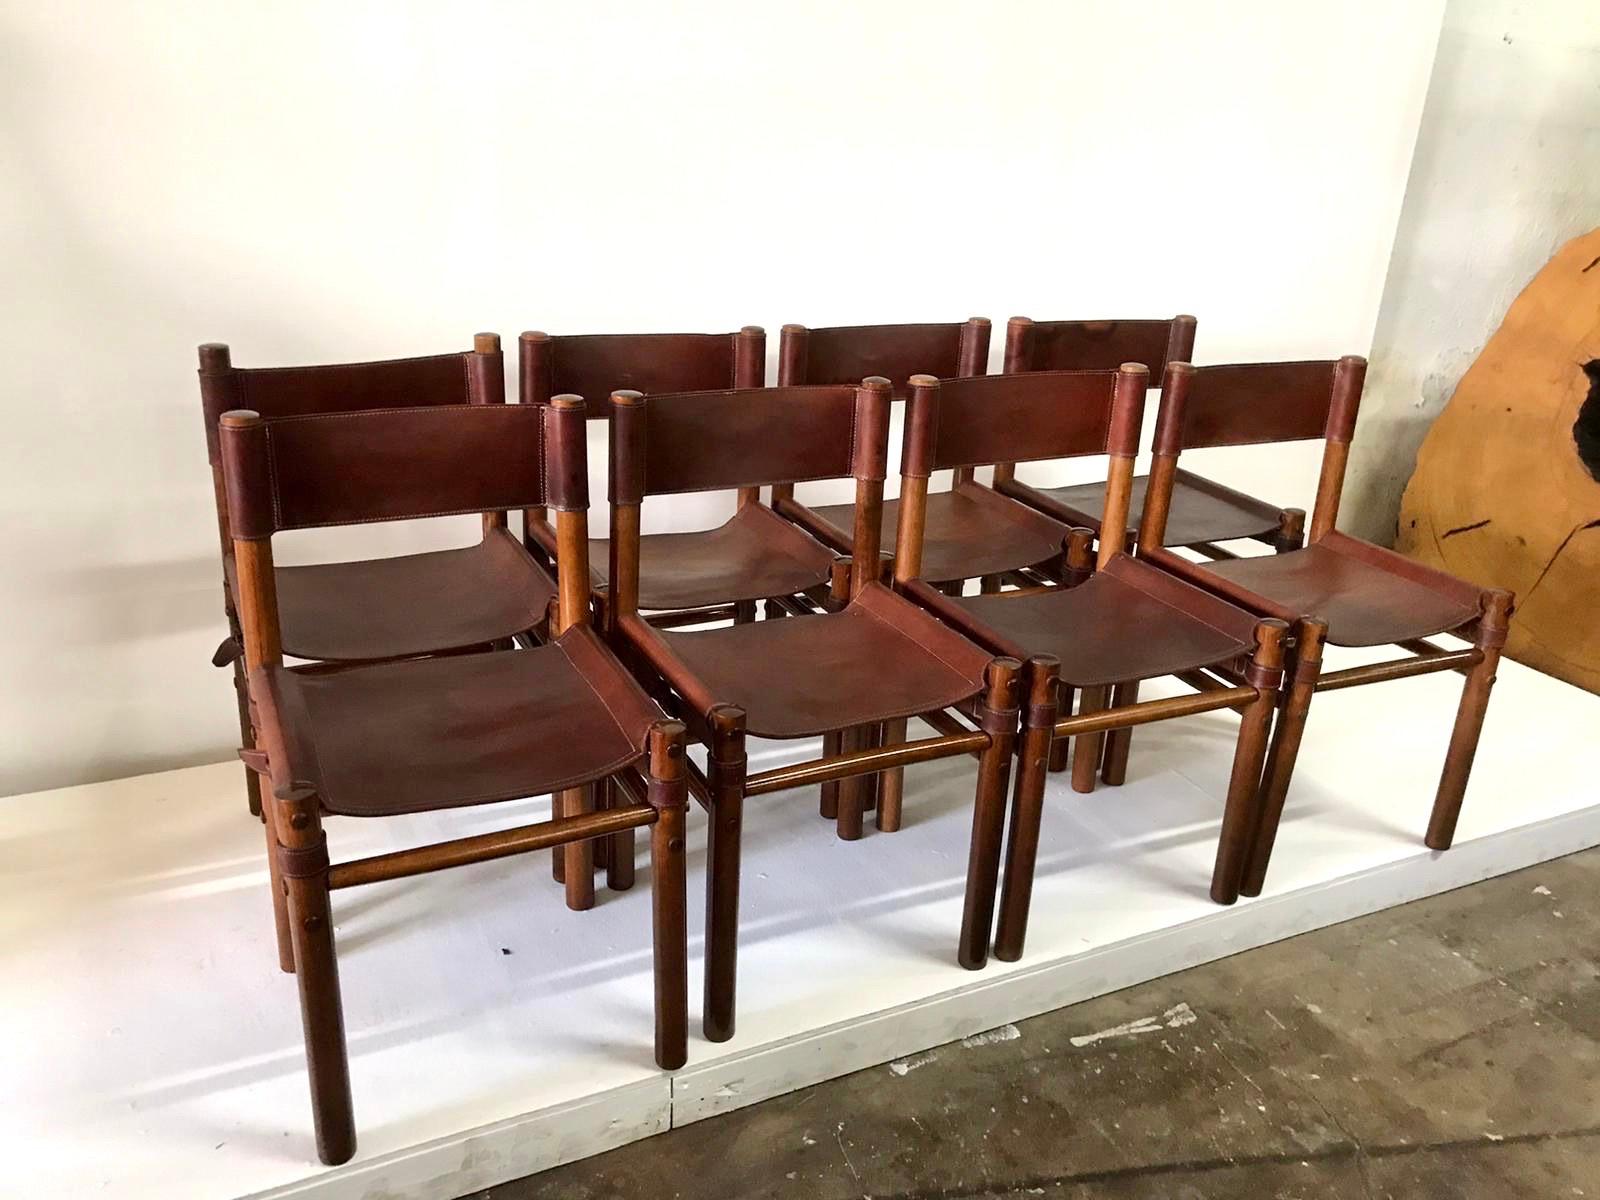 Argentine Hand Stitched Leather Estancia Chairs, Set of 8